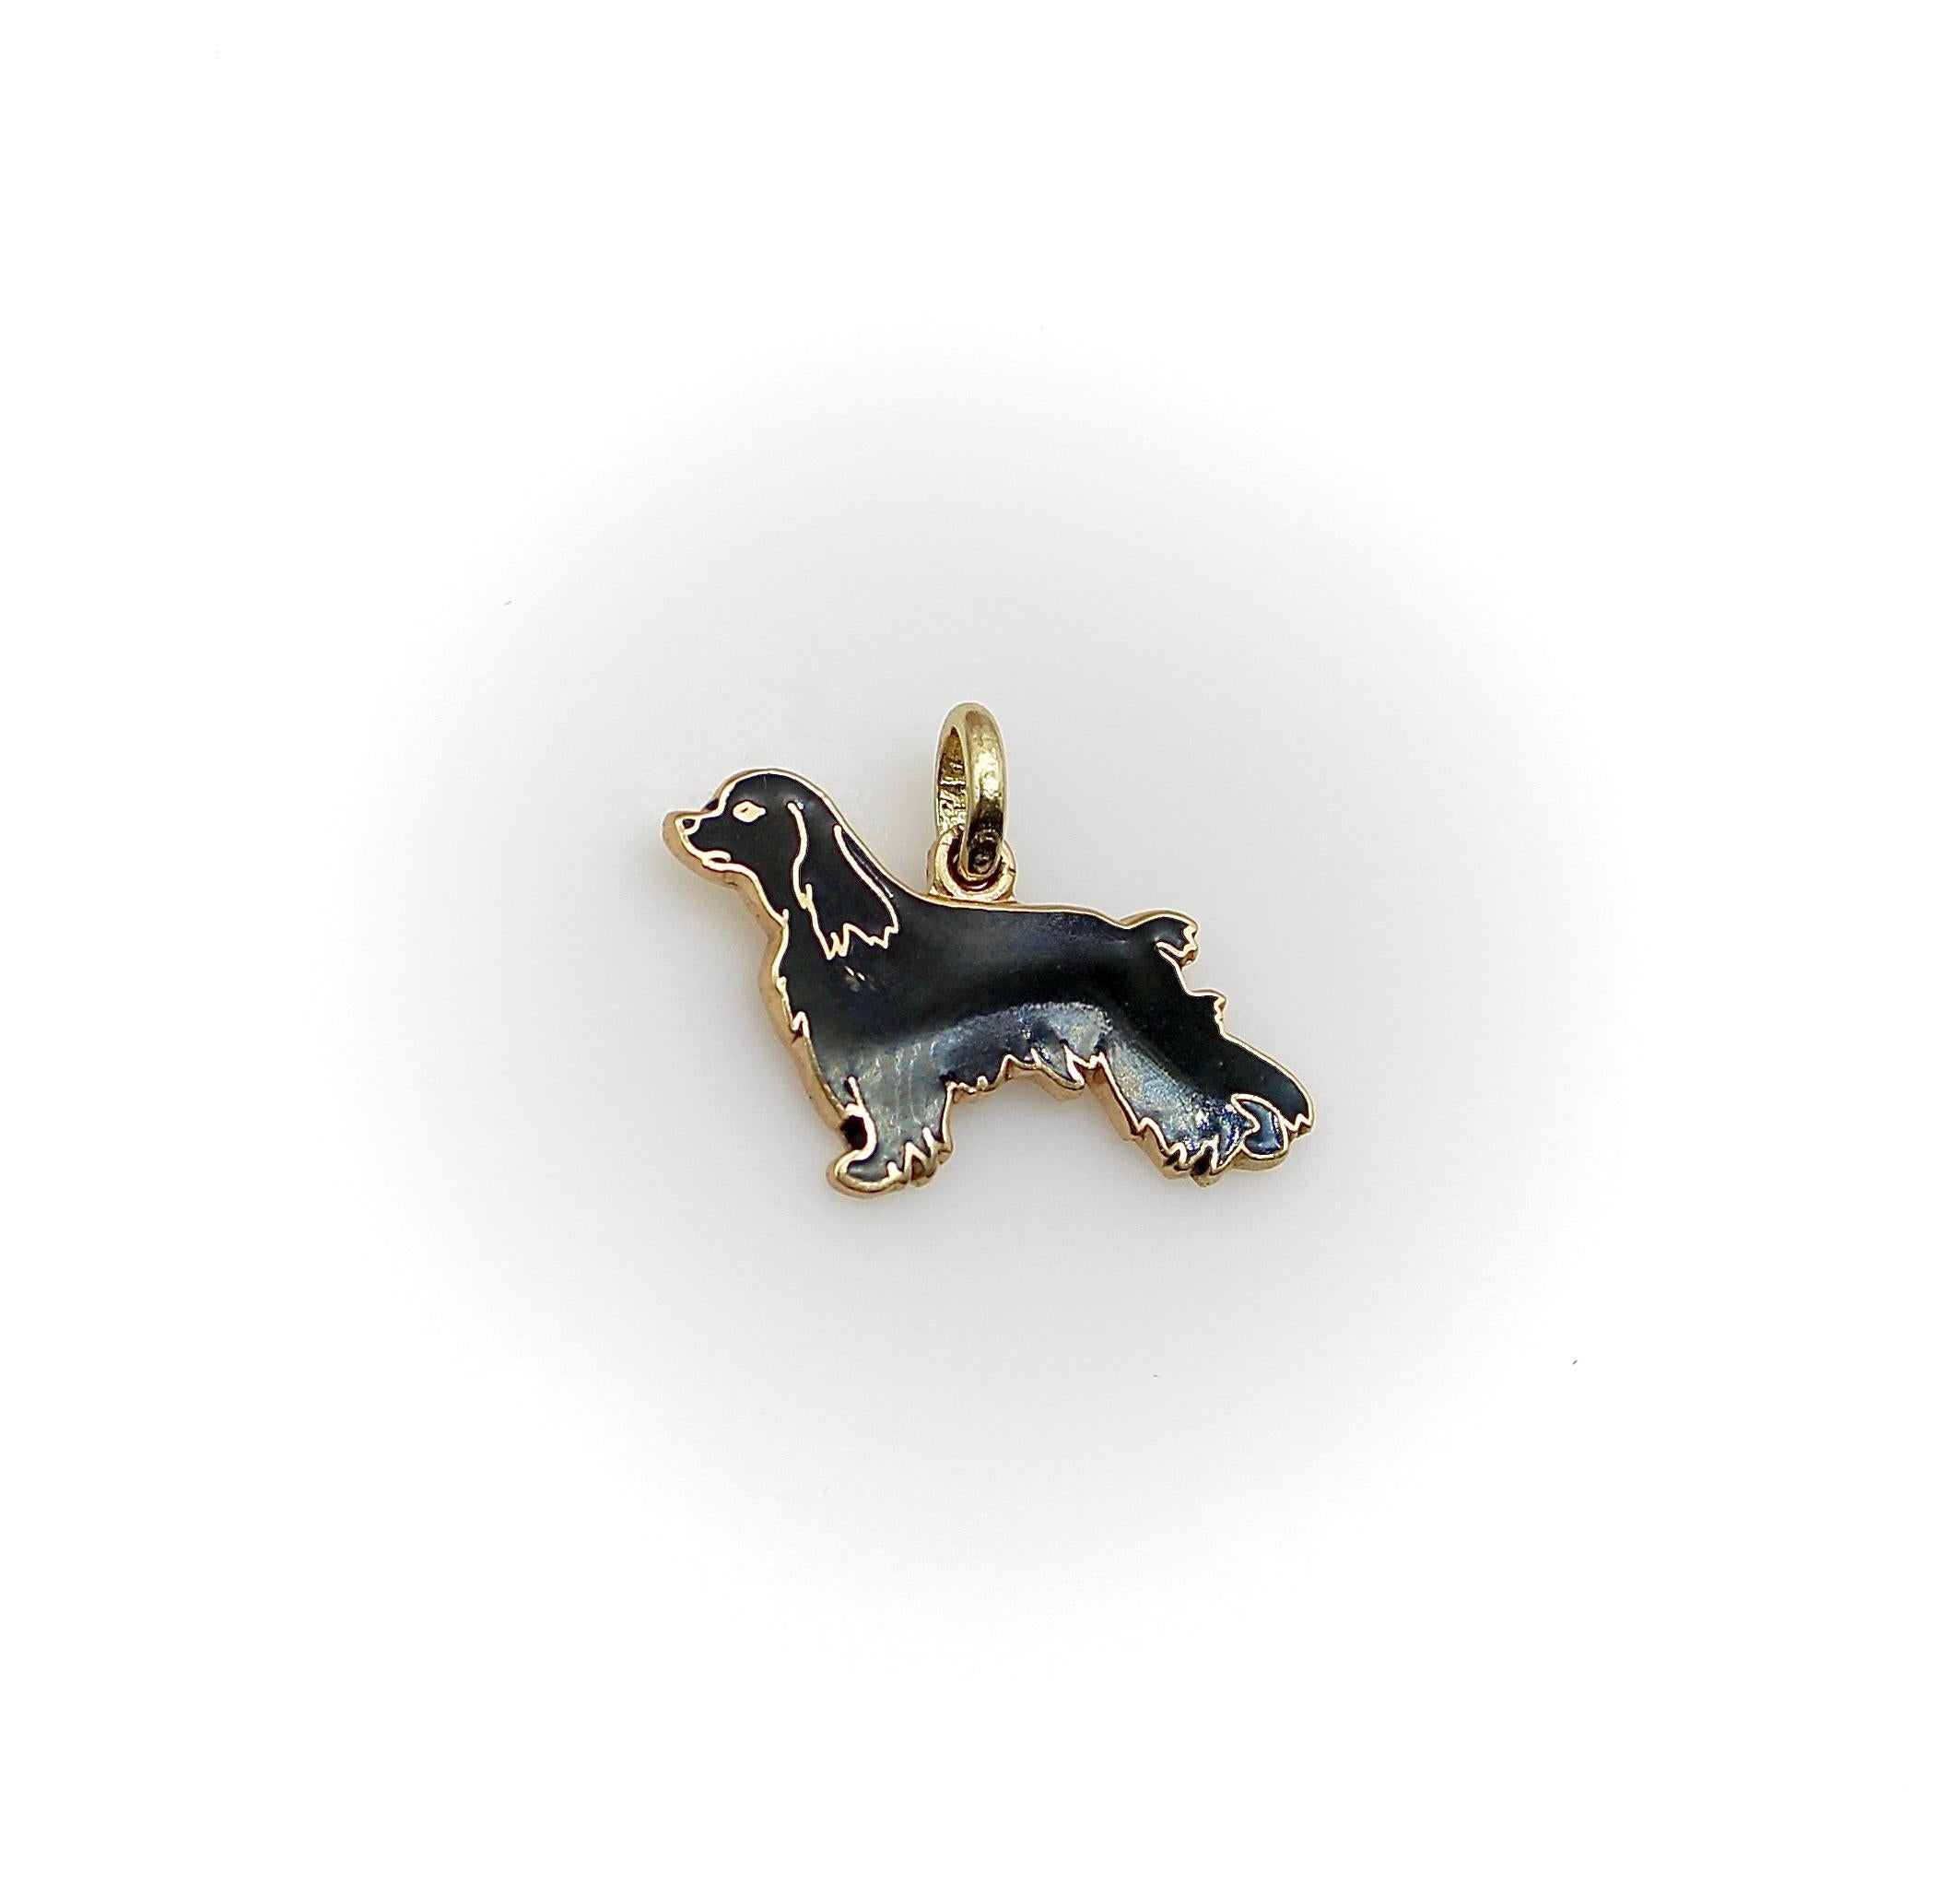 Made in 14k gold with enamel details, the dog in this charm is a Springer Spaniel, shown in profile in a proud pose, like a show dog. The outline of the dog is highlighted in gold, and  black enamel butts up against the gold to create a pattern of